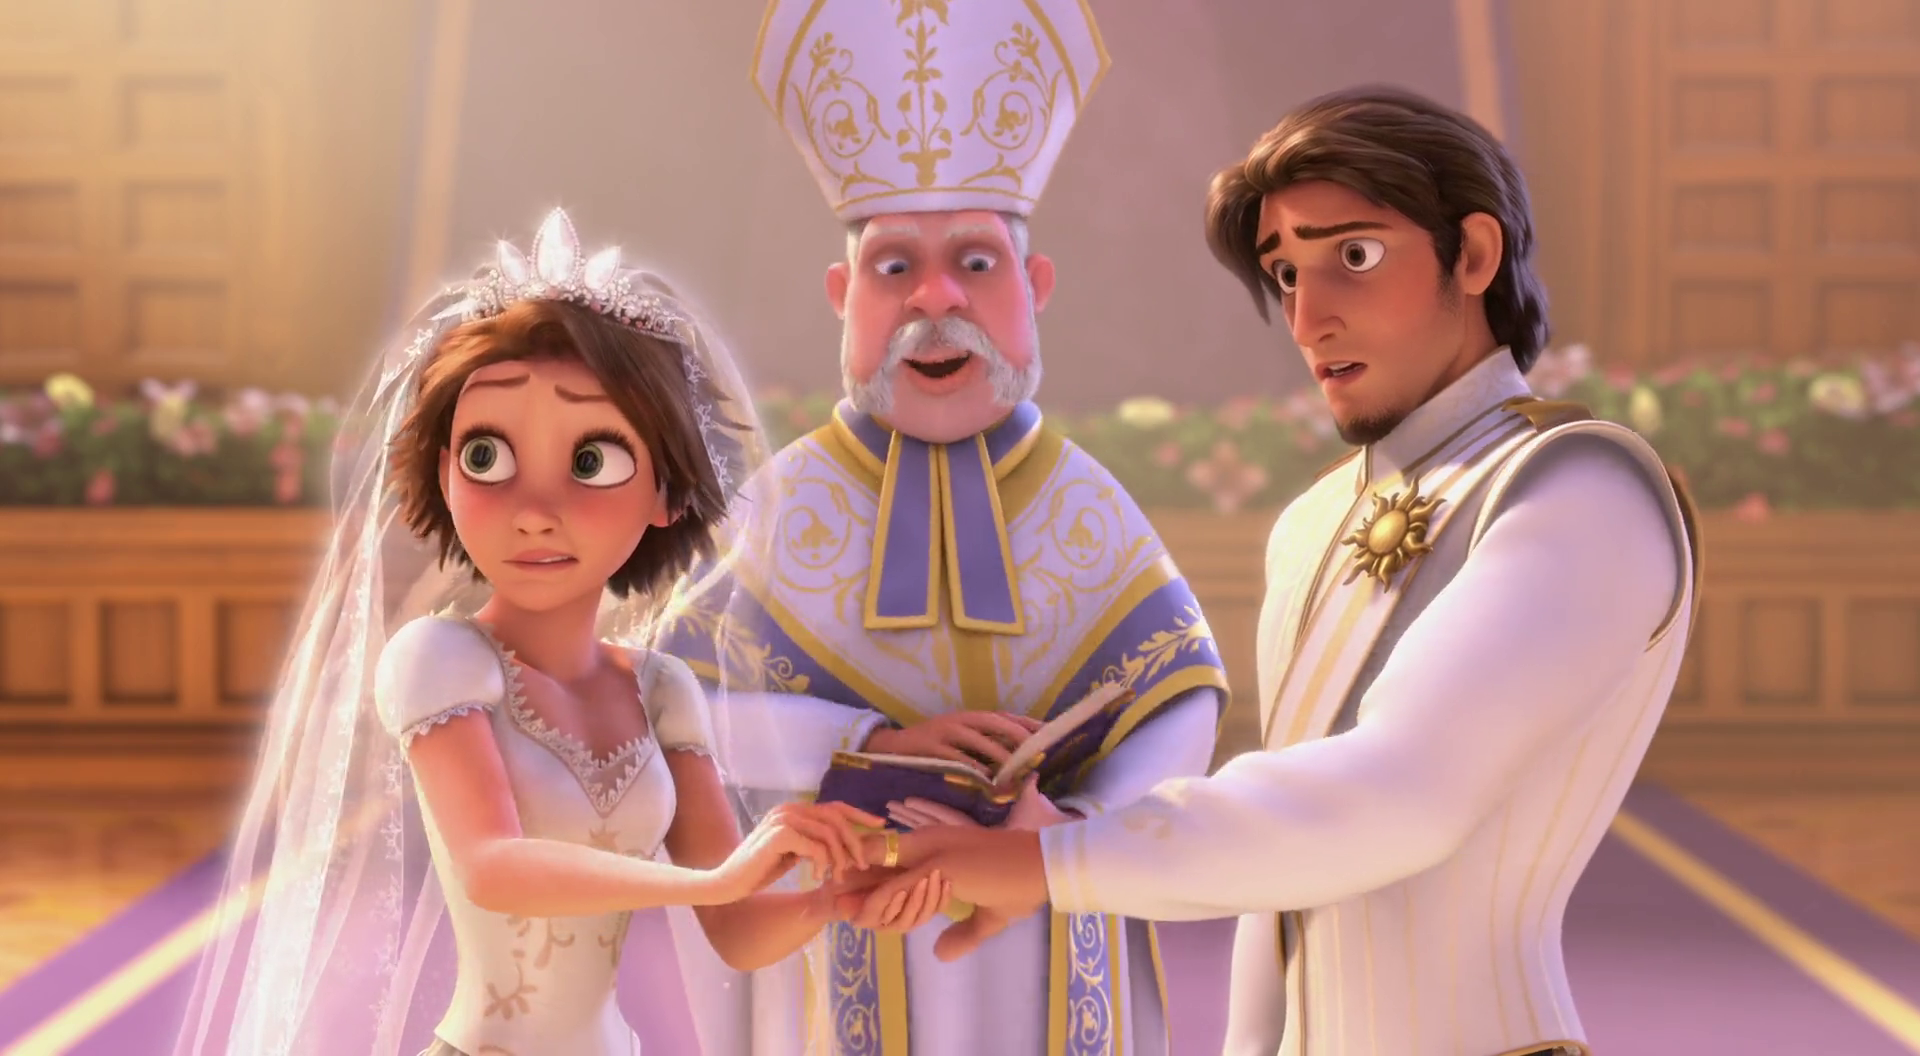 Tangled: The Animated Series Will Either Flop or Fly - The Fandomentals